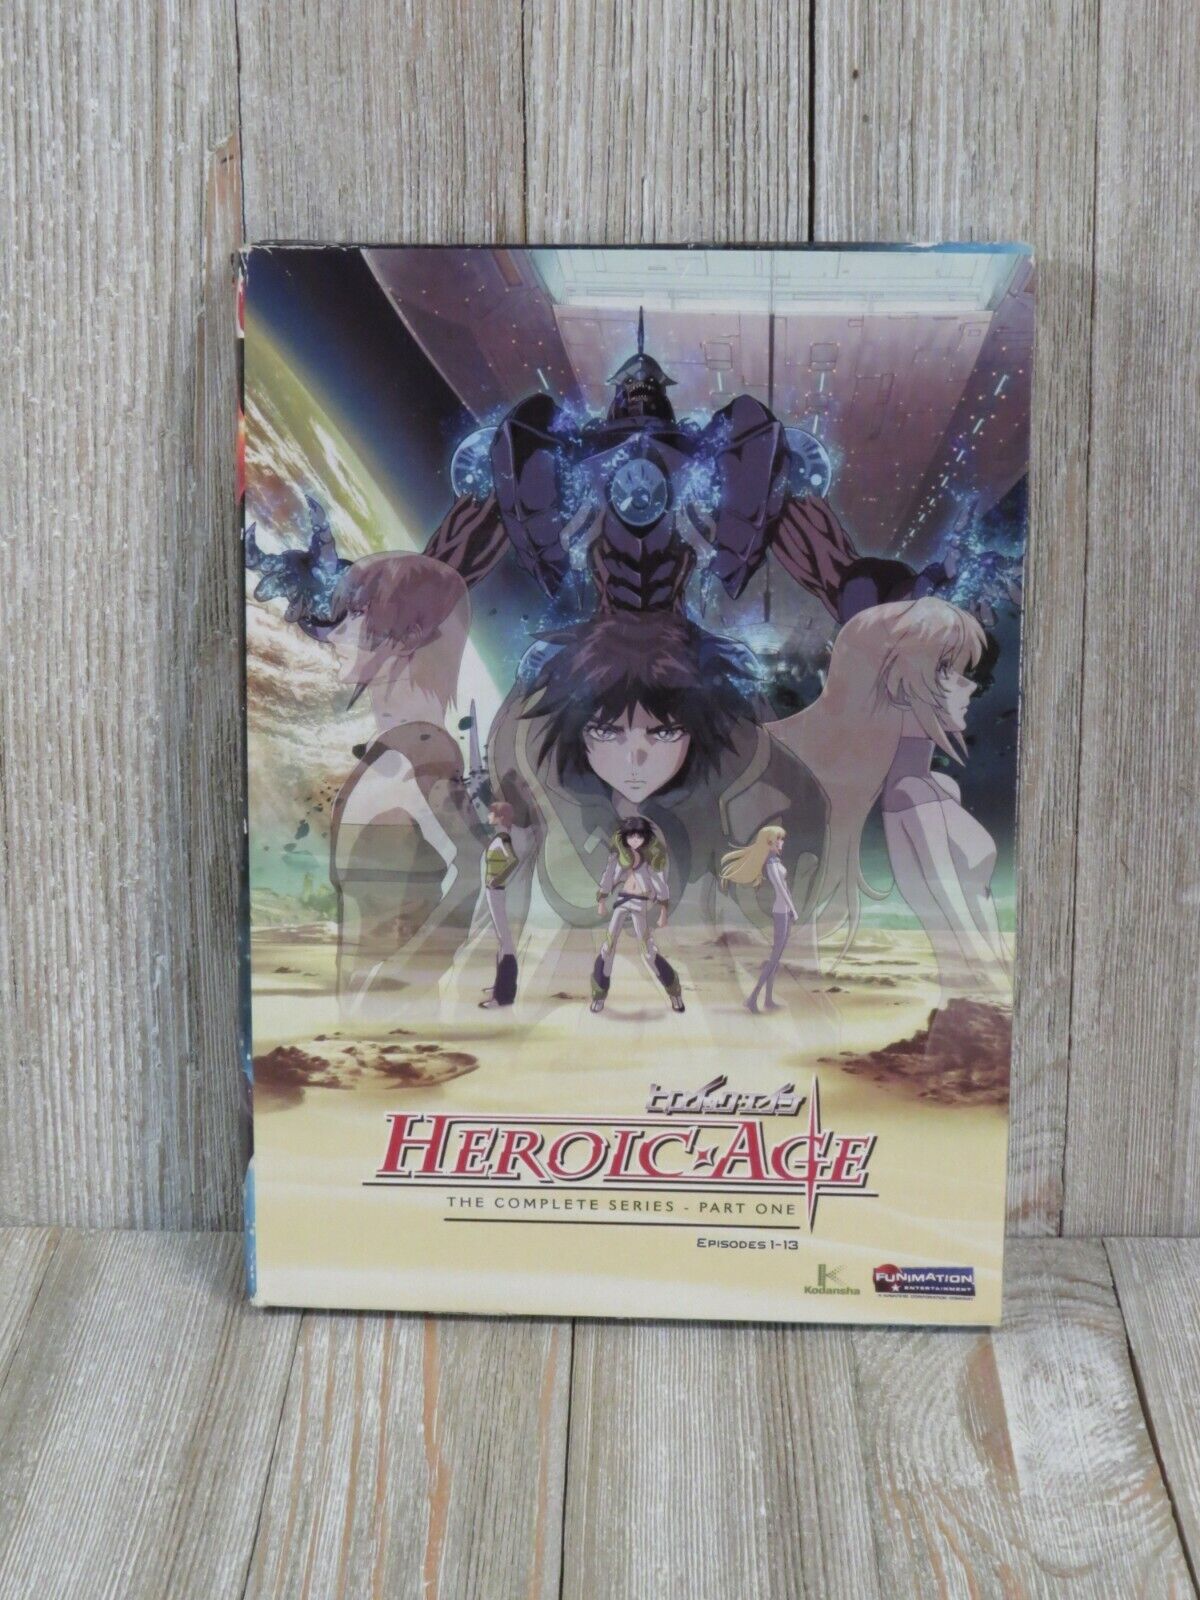 danyal young recommends heroic age episode 1 pic